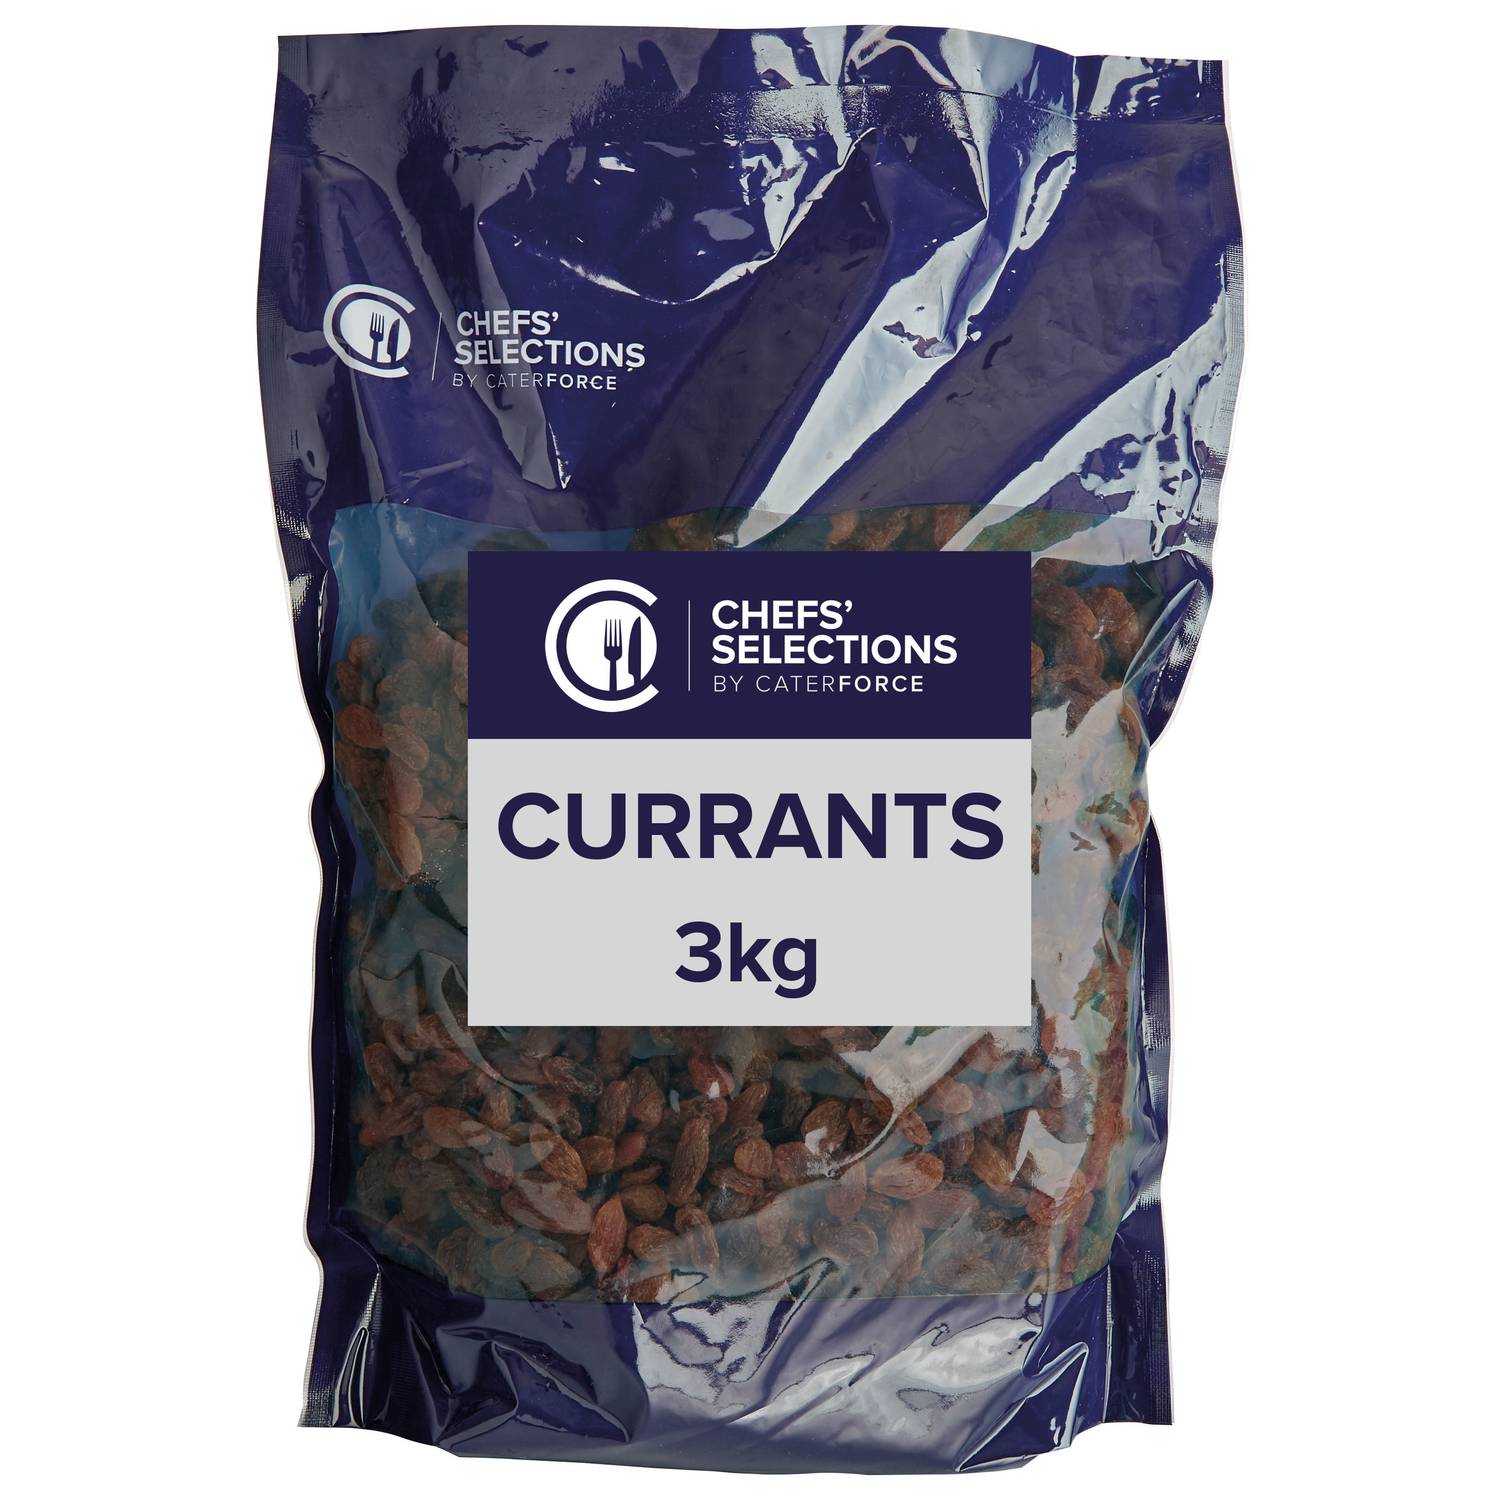 Chefs’ Selections Currants (4 x 3kg)